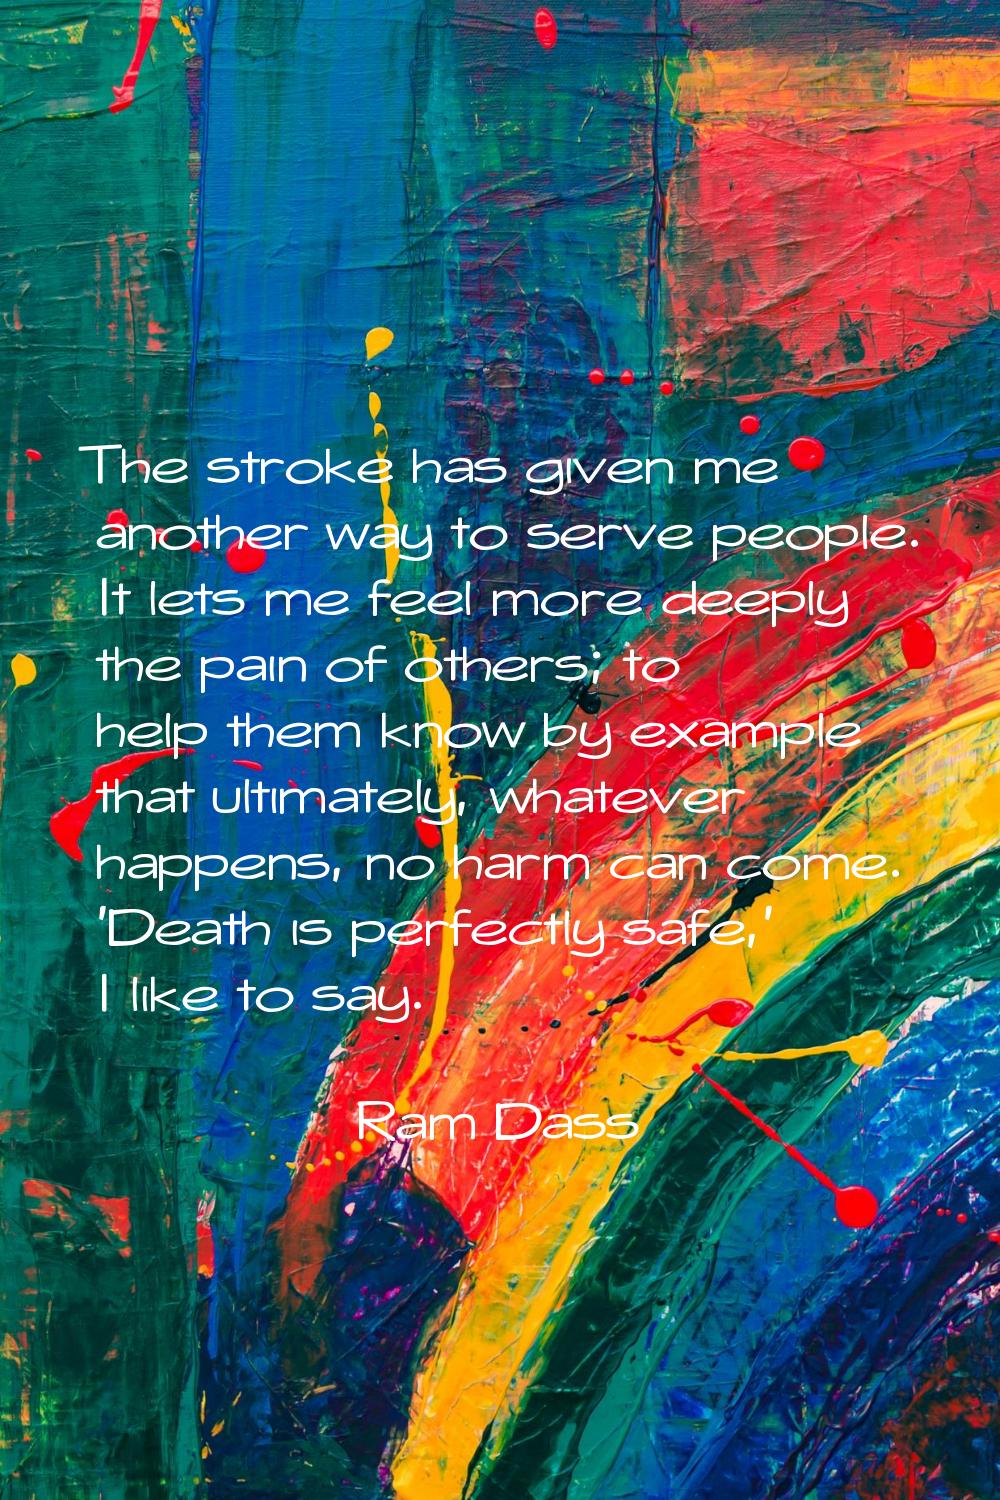 The stroke has given me another way to serve people. It lets me feel more deeply the pain of others